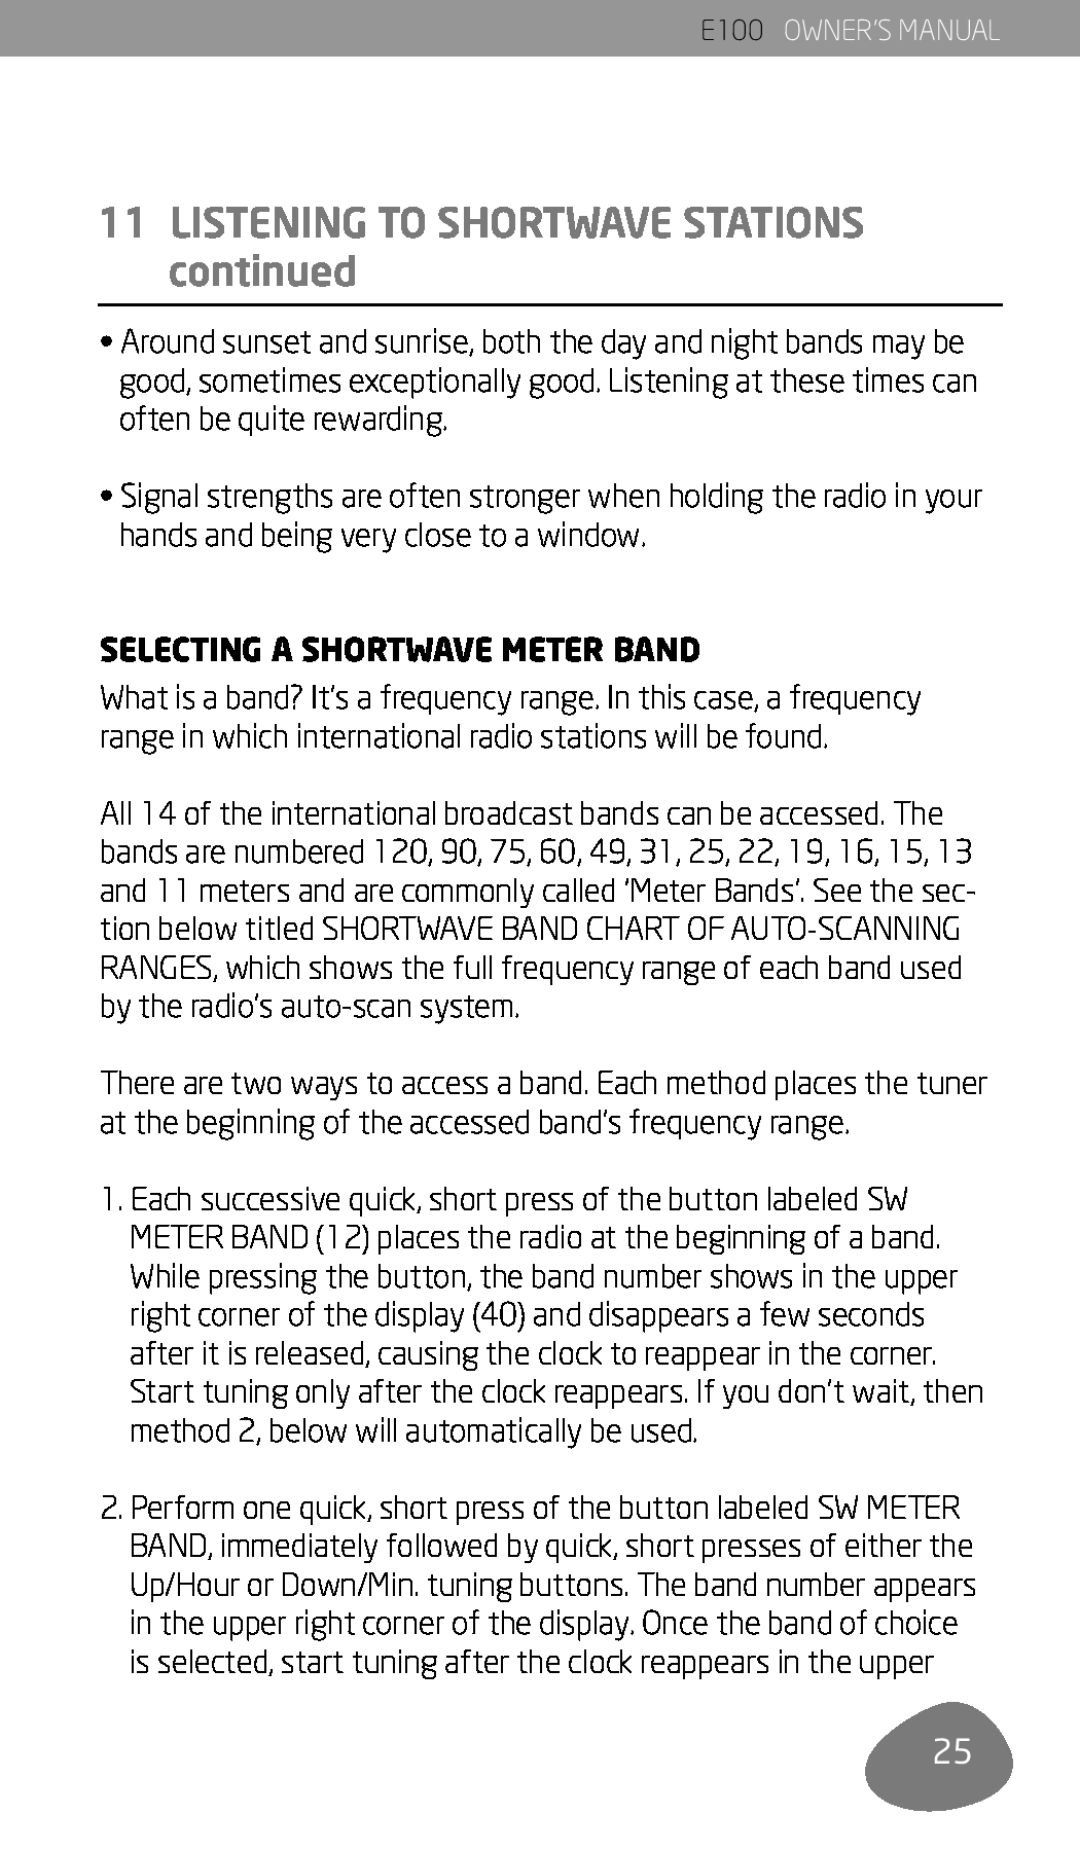 Eton E100 owner manual 11LISTENING TO SHORTWAVE STATIONS continued, Selecting A Shortwave Meter Band 